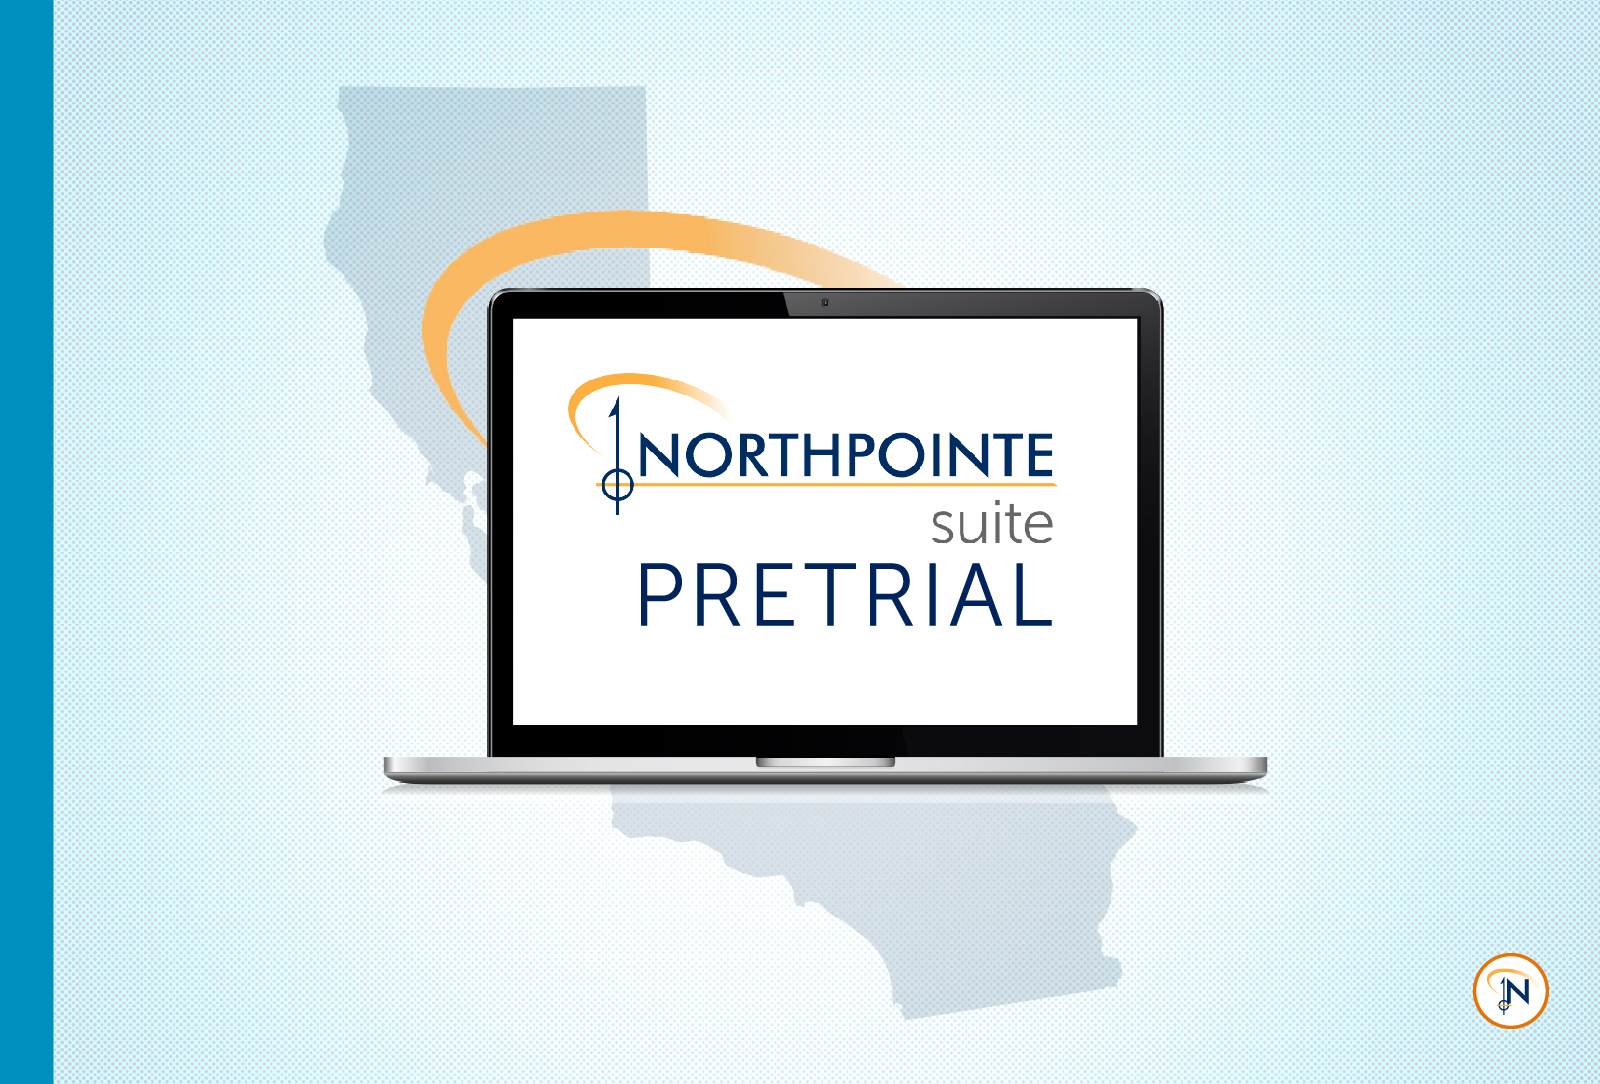 California + Northpointe Suite Pretrial = Advancing Justice, Together